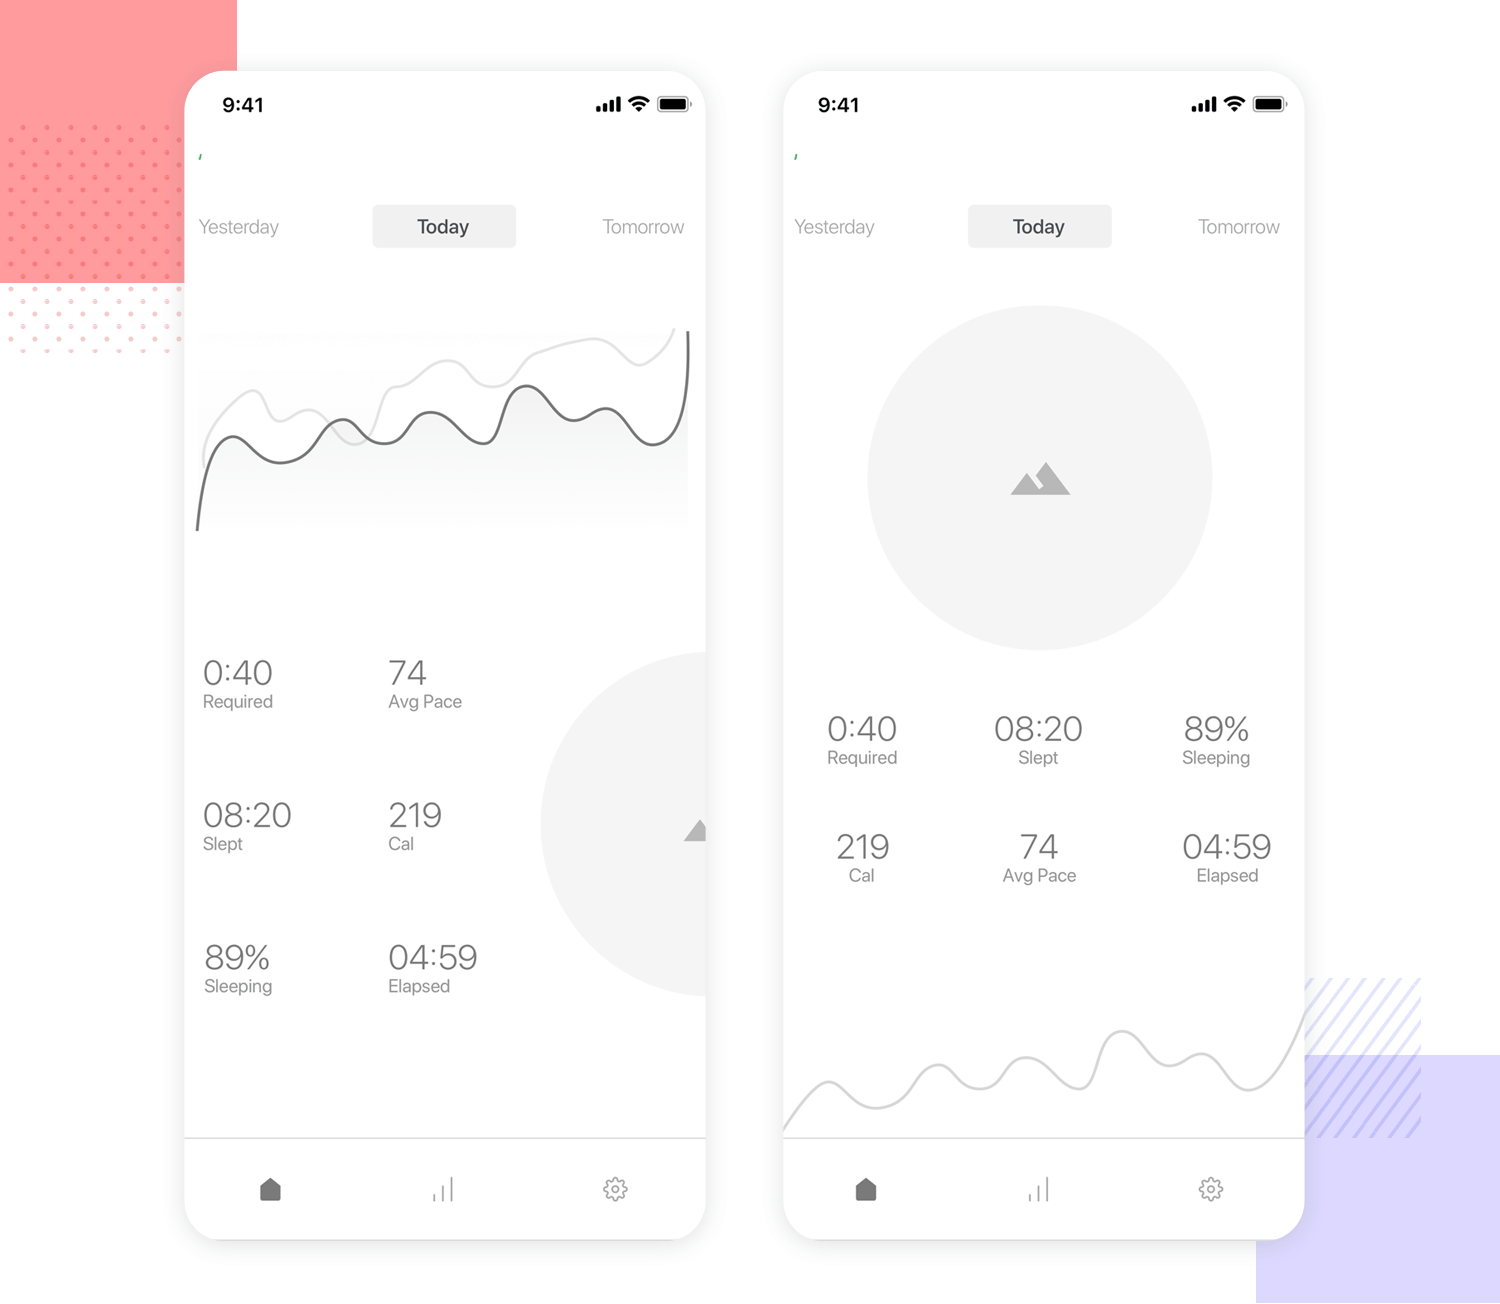 mobile app wireframe for banking and personal finance tools